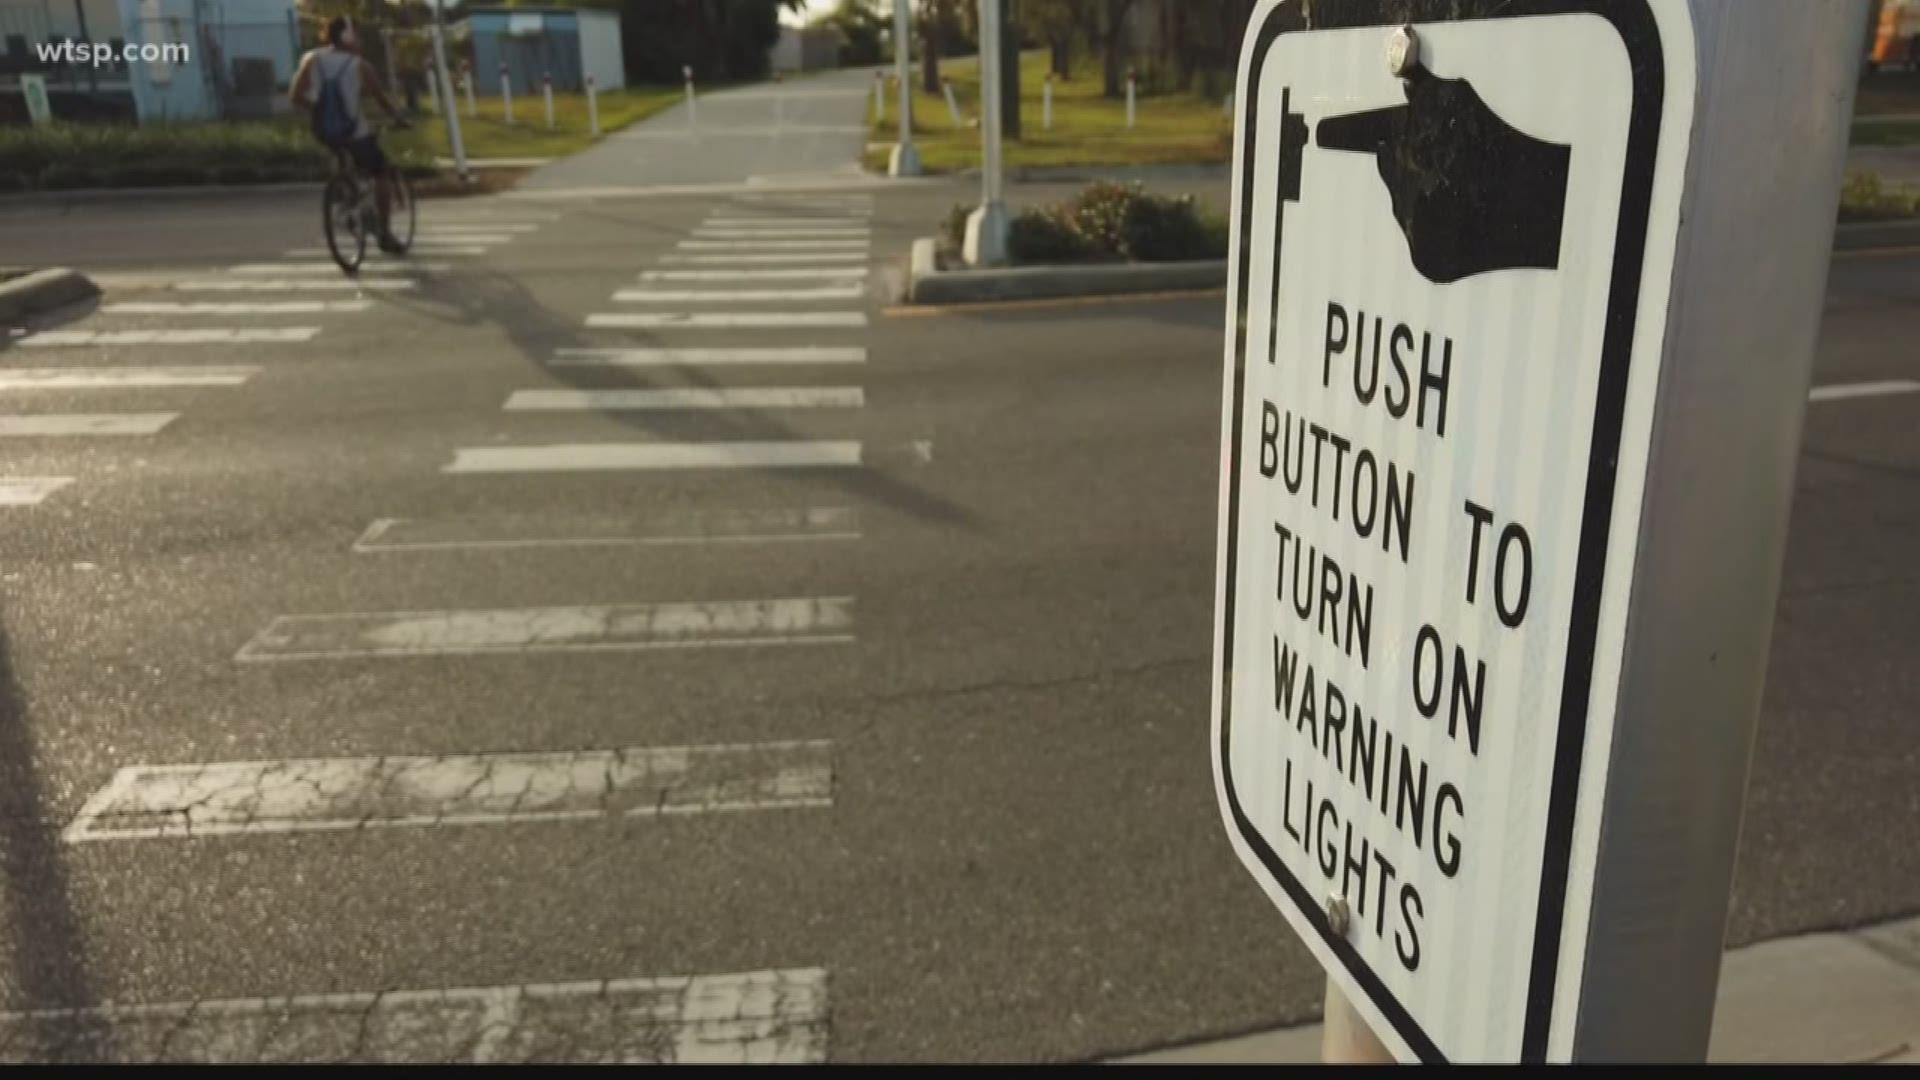 Crosswalk safety issues aren’t new to Florida, but neighbors are still searching for ways to keep each other safe.